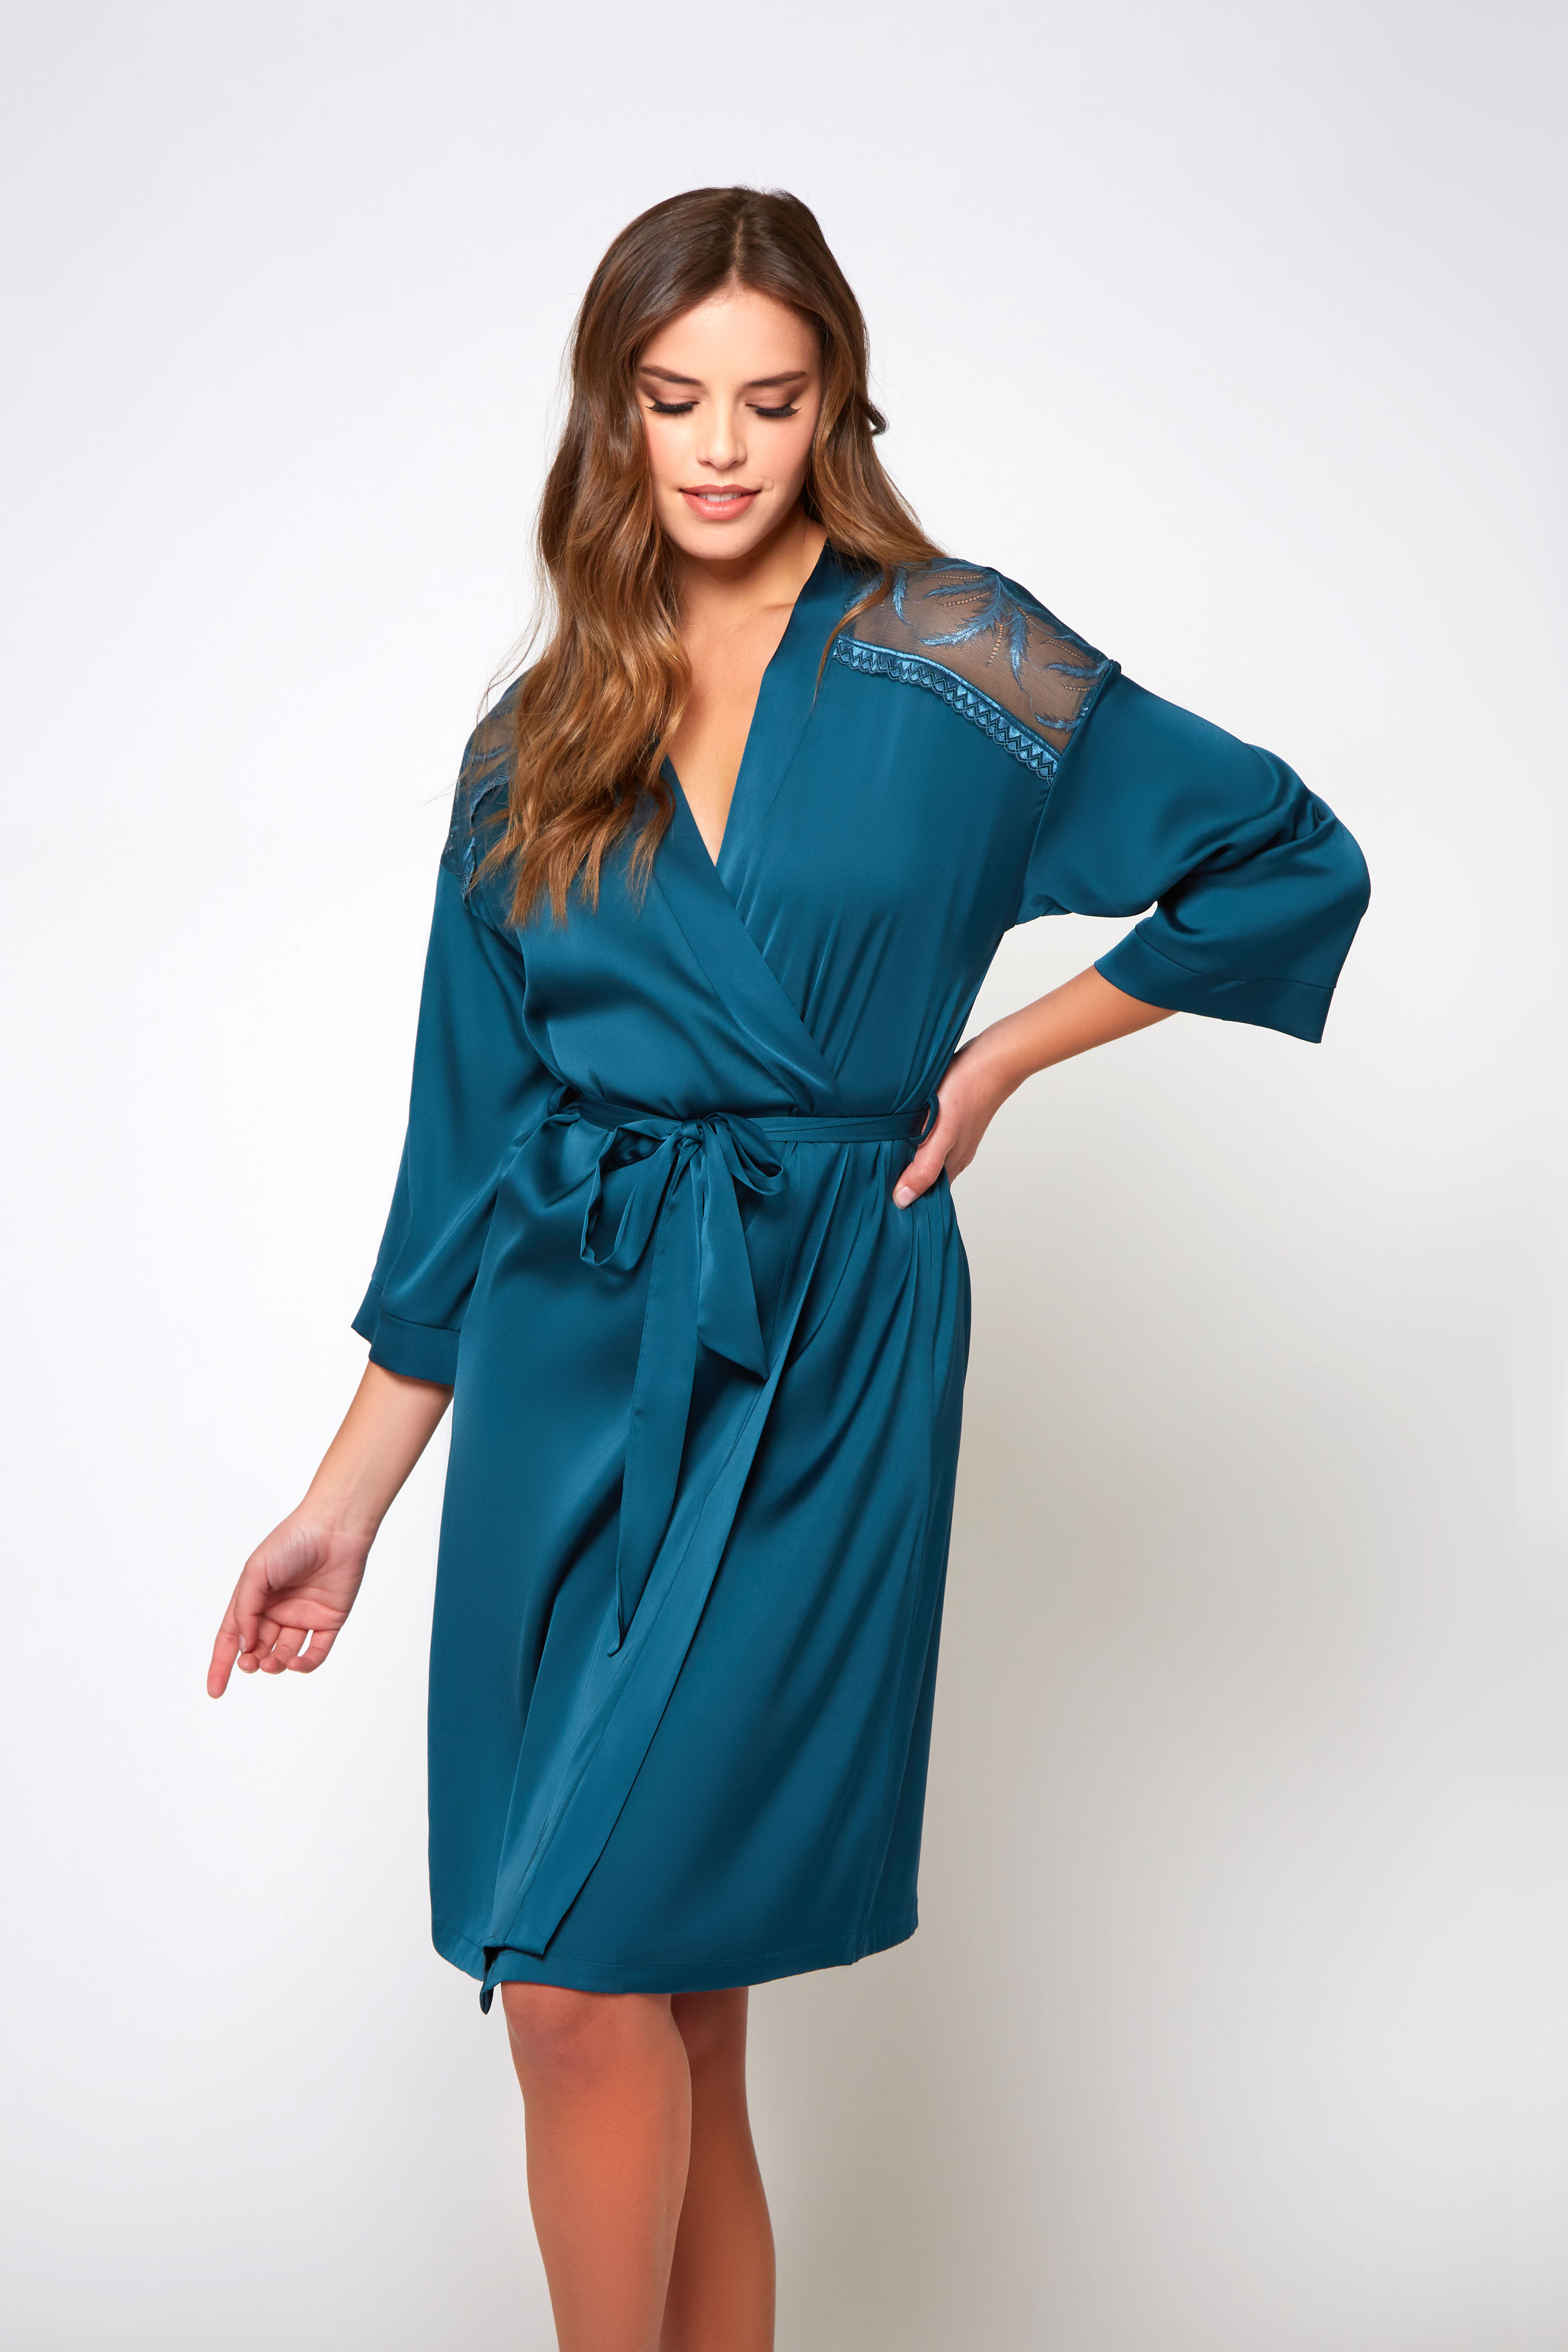 Lucile Robe - 78134 Teal